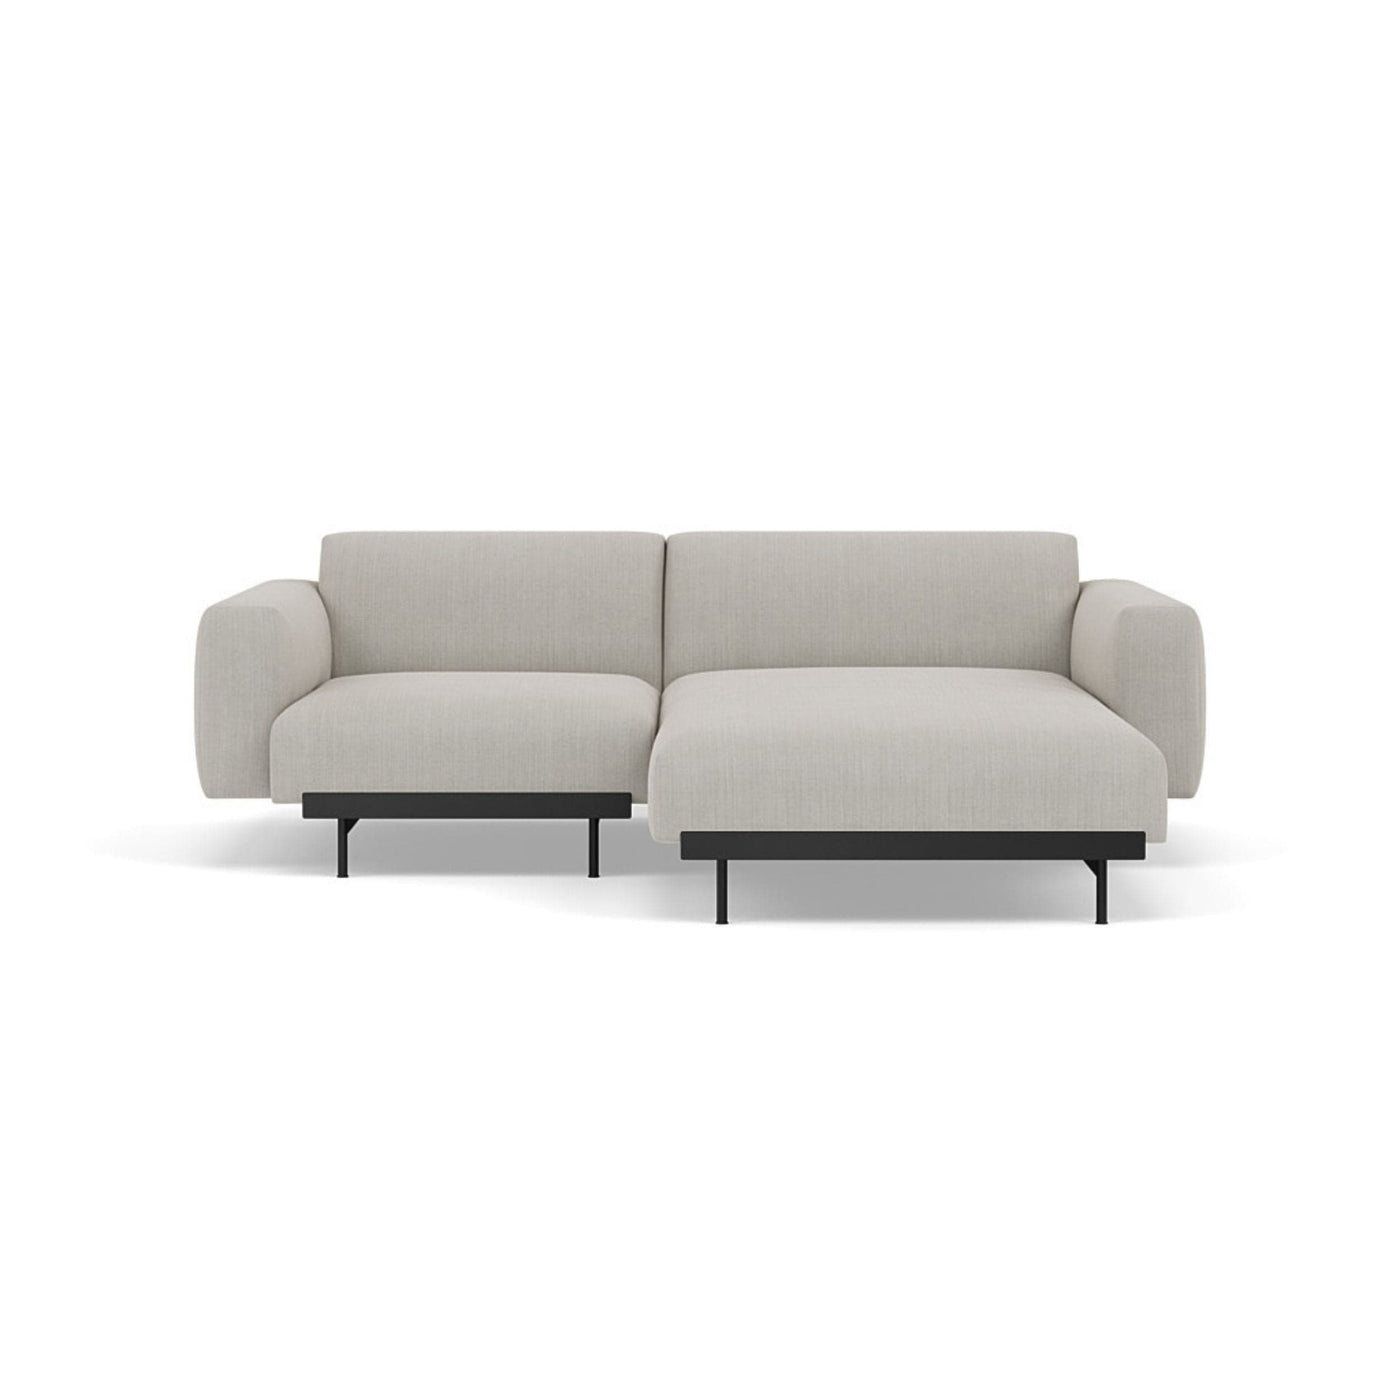 Muuto In Situ Modular 2 Seater Sofa, configuration 4. Made to order from someday designs #colour_fiord-201